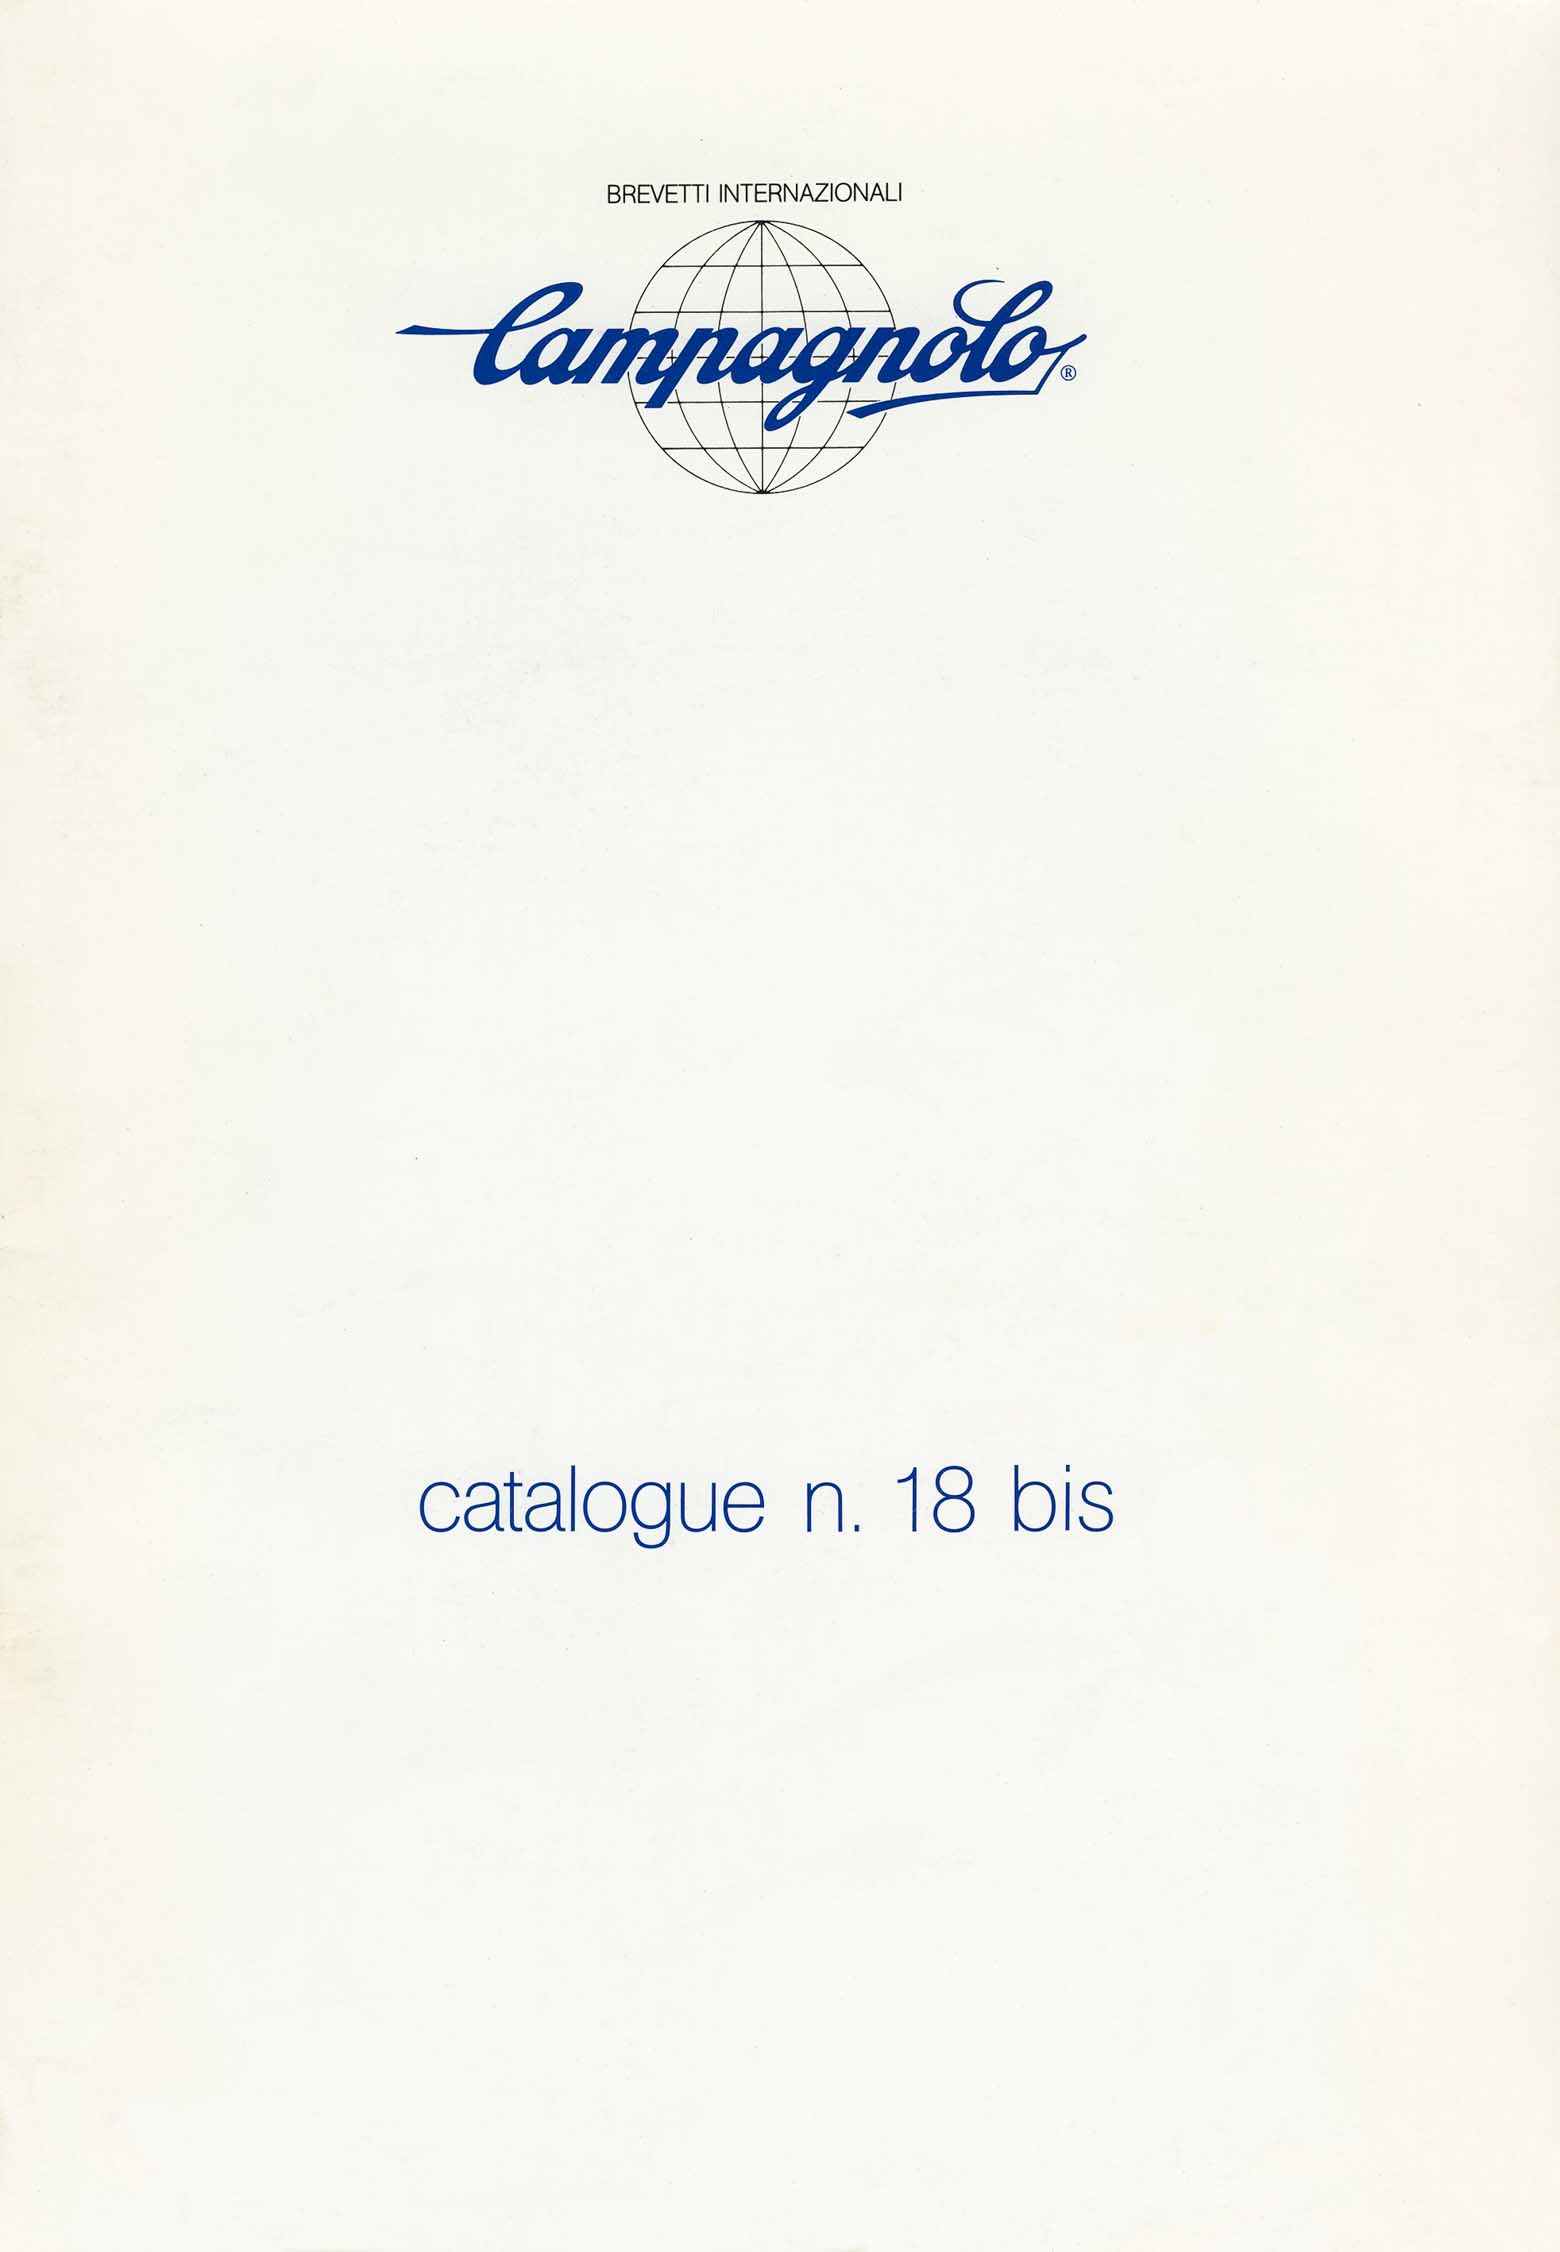 Campagnolo - catalogue n. 18 bis page 01 main image